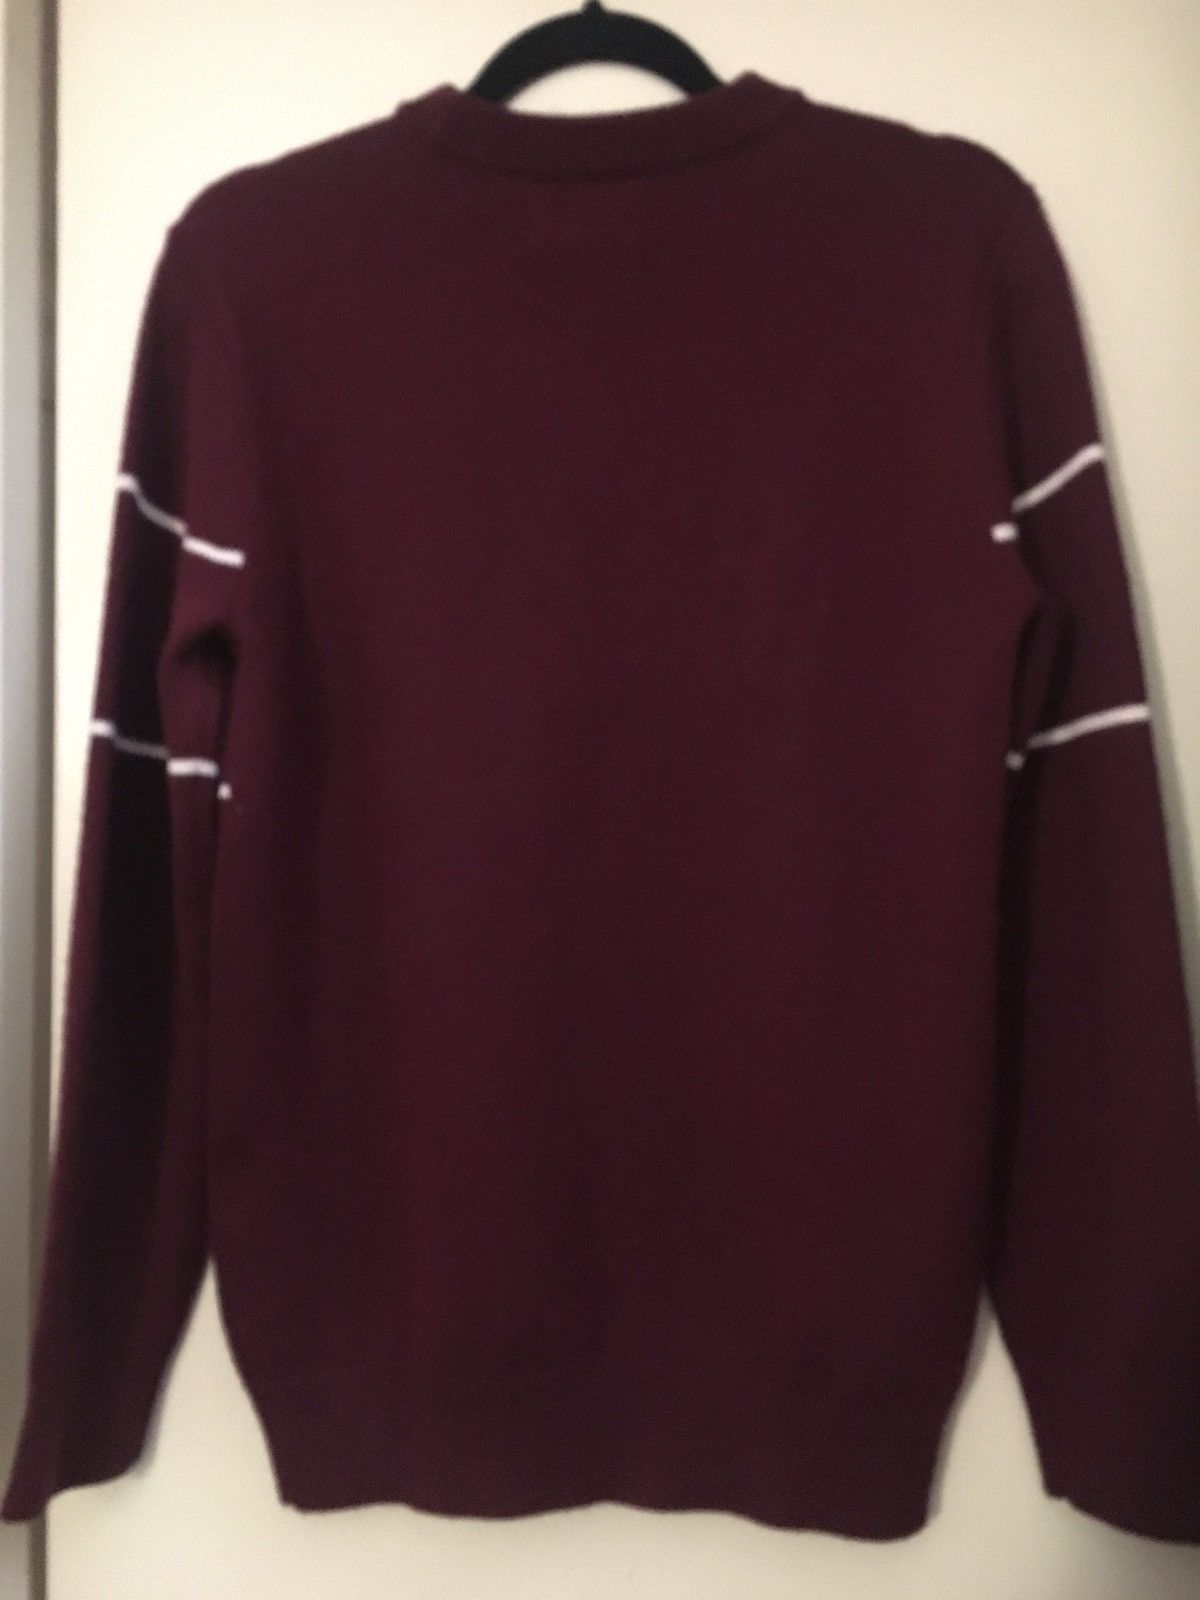 Palace Preppy palace sweater Size US S / EU 44-46 / 1 - 2 Preview